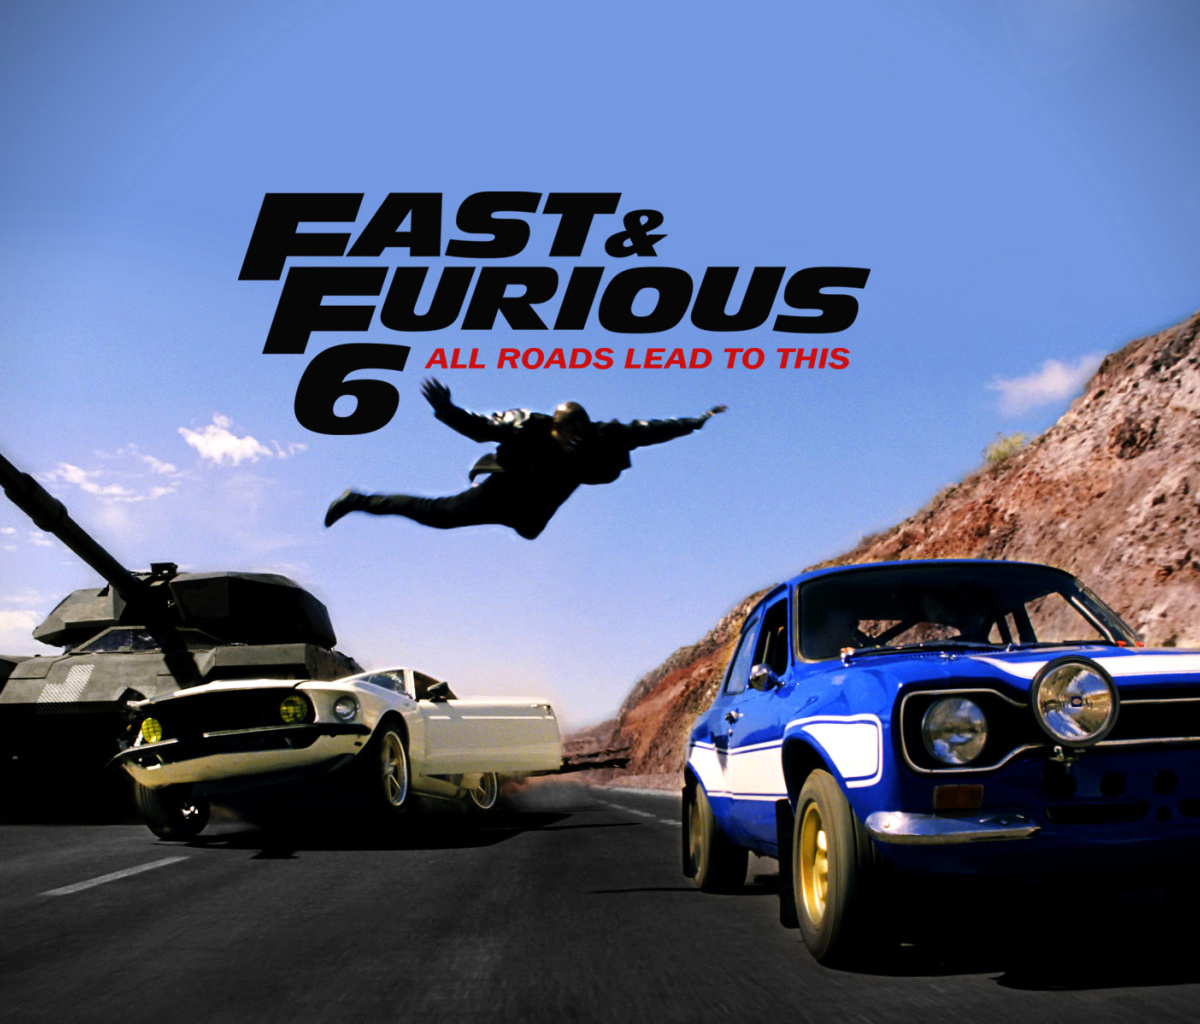 Fast and furious 6 Trailer wallpaper 1200x1024